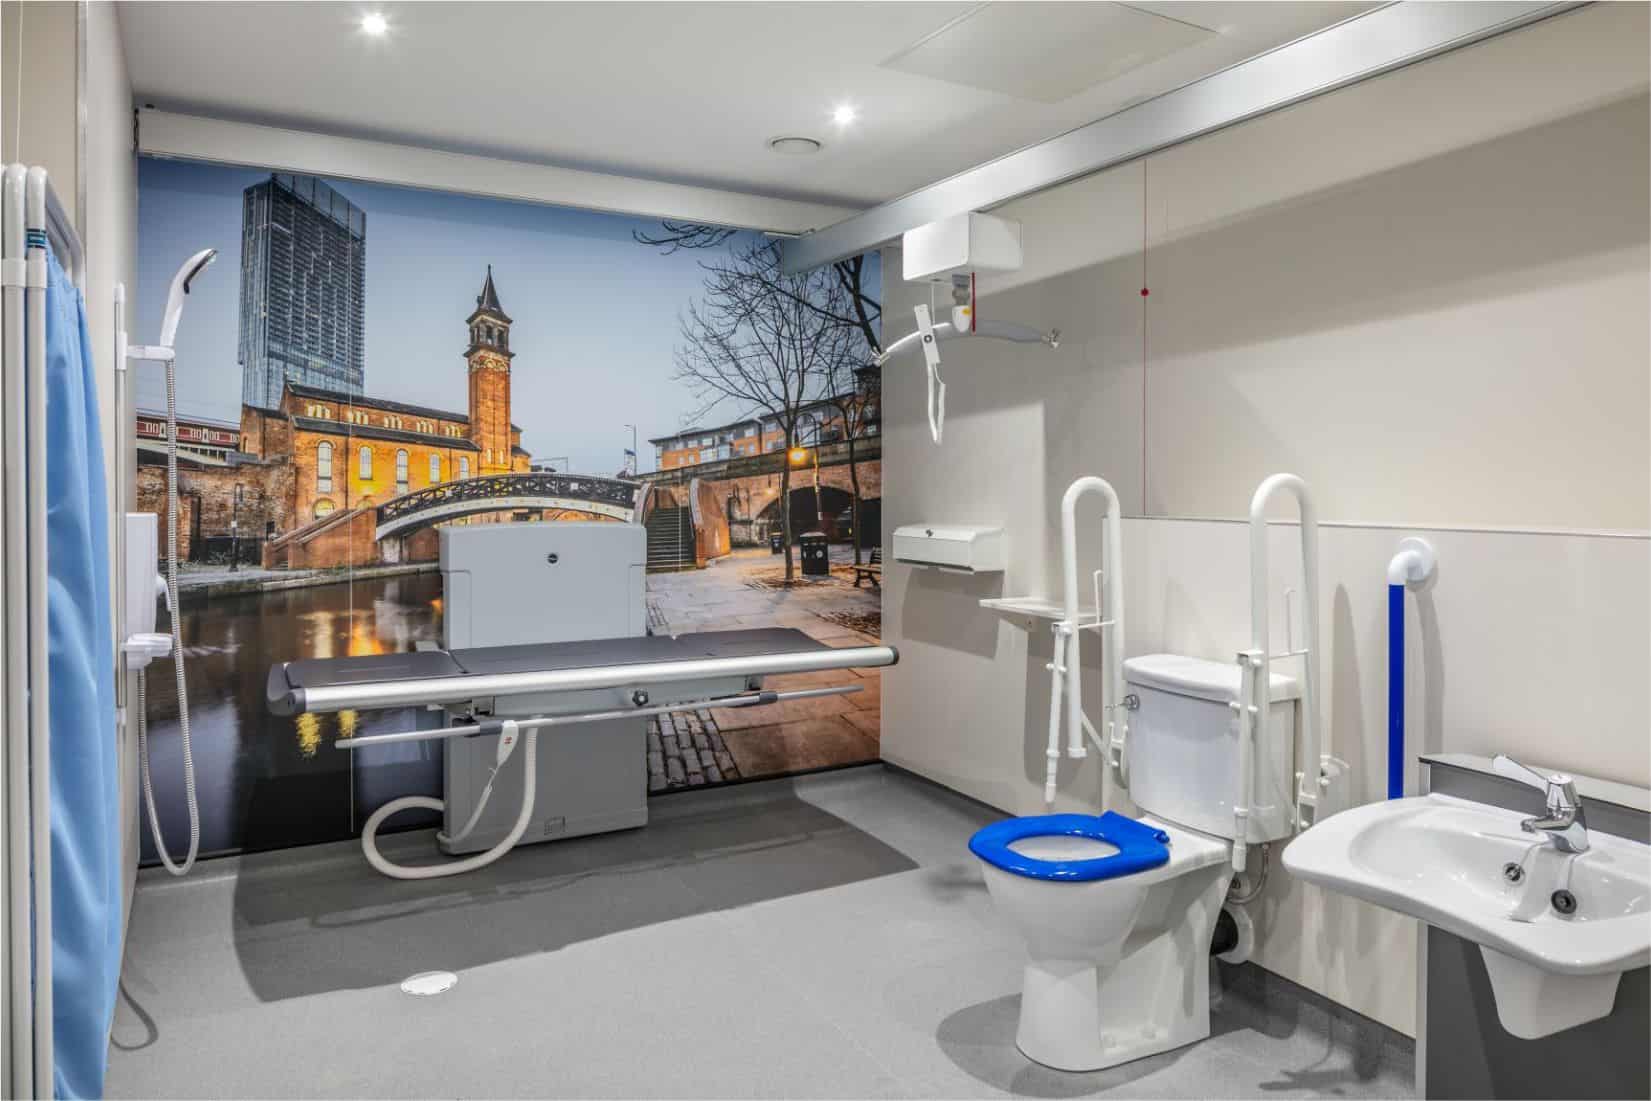 Inside the new Changing Places toilet